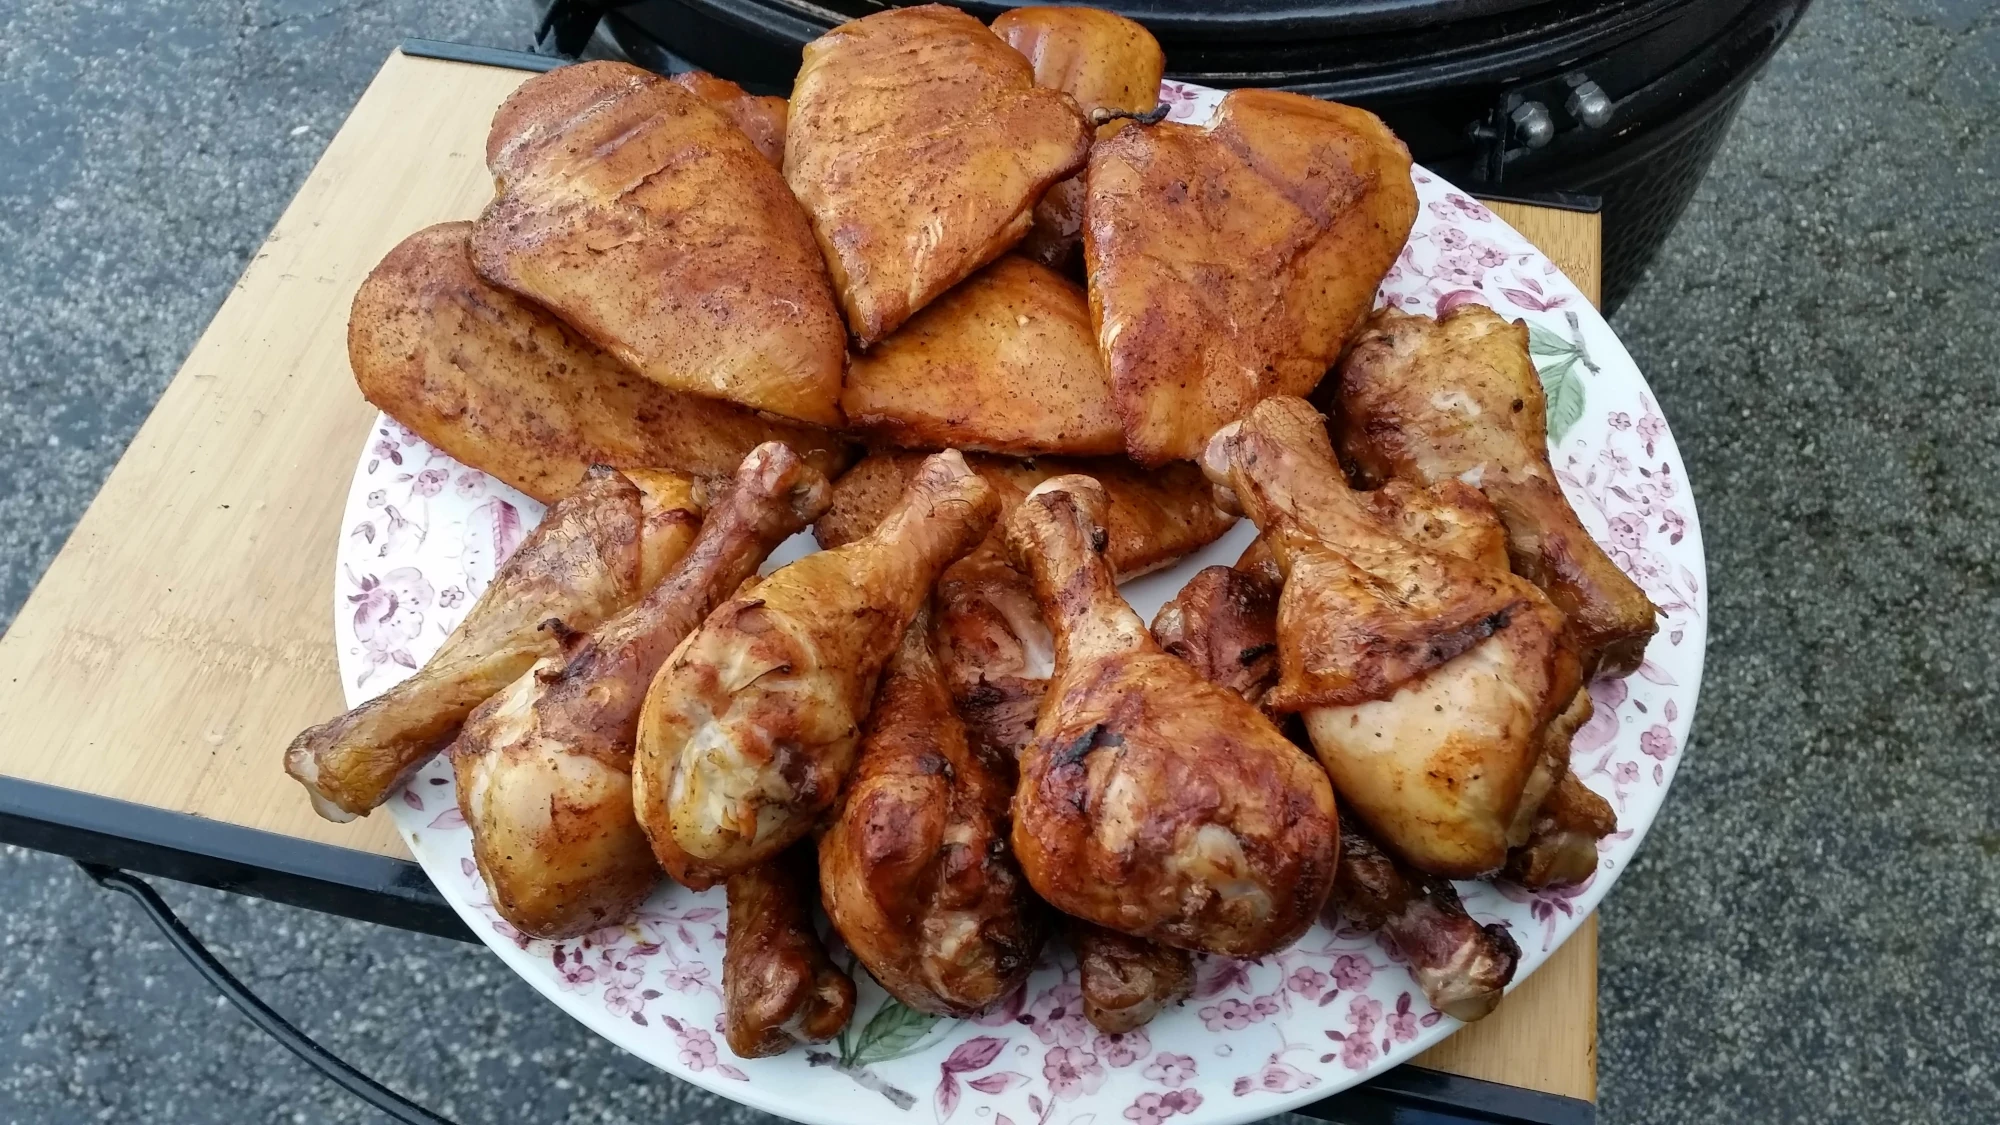 Fried and Smoked Chicken Thighs and Breasts